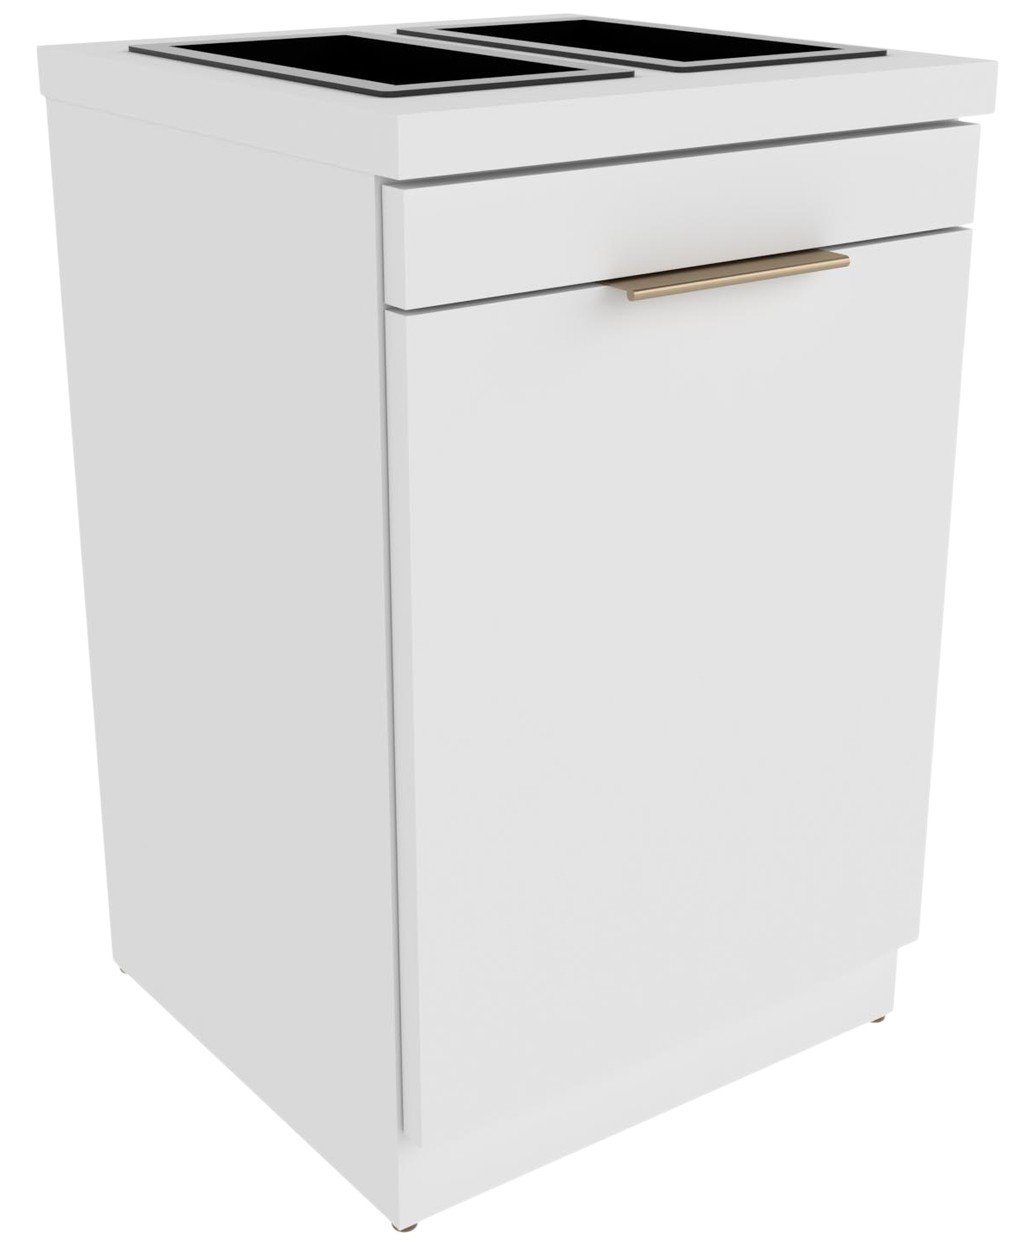 Collins E1107-16 Bottle Well Storage Cabinet